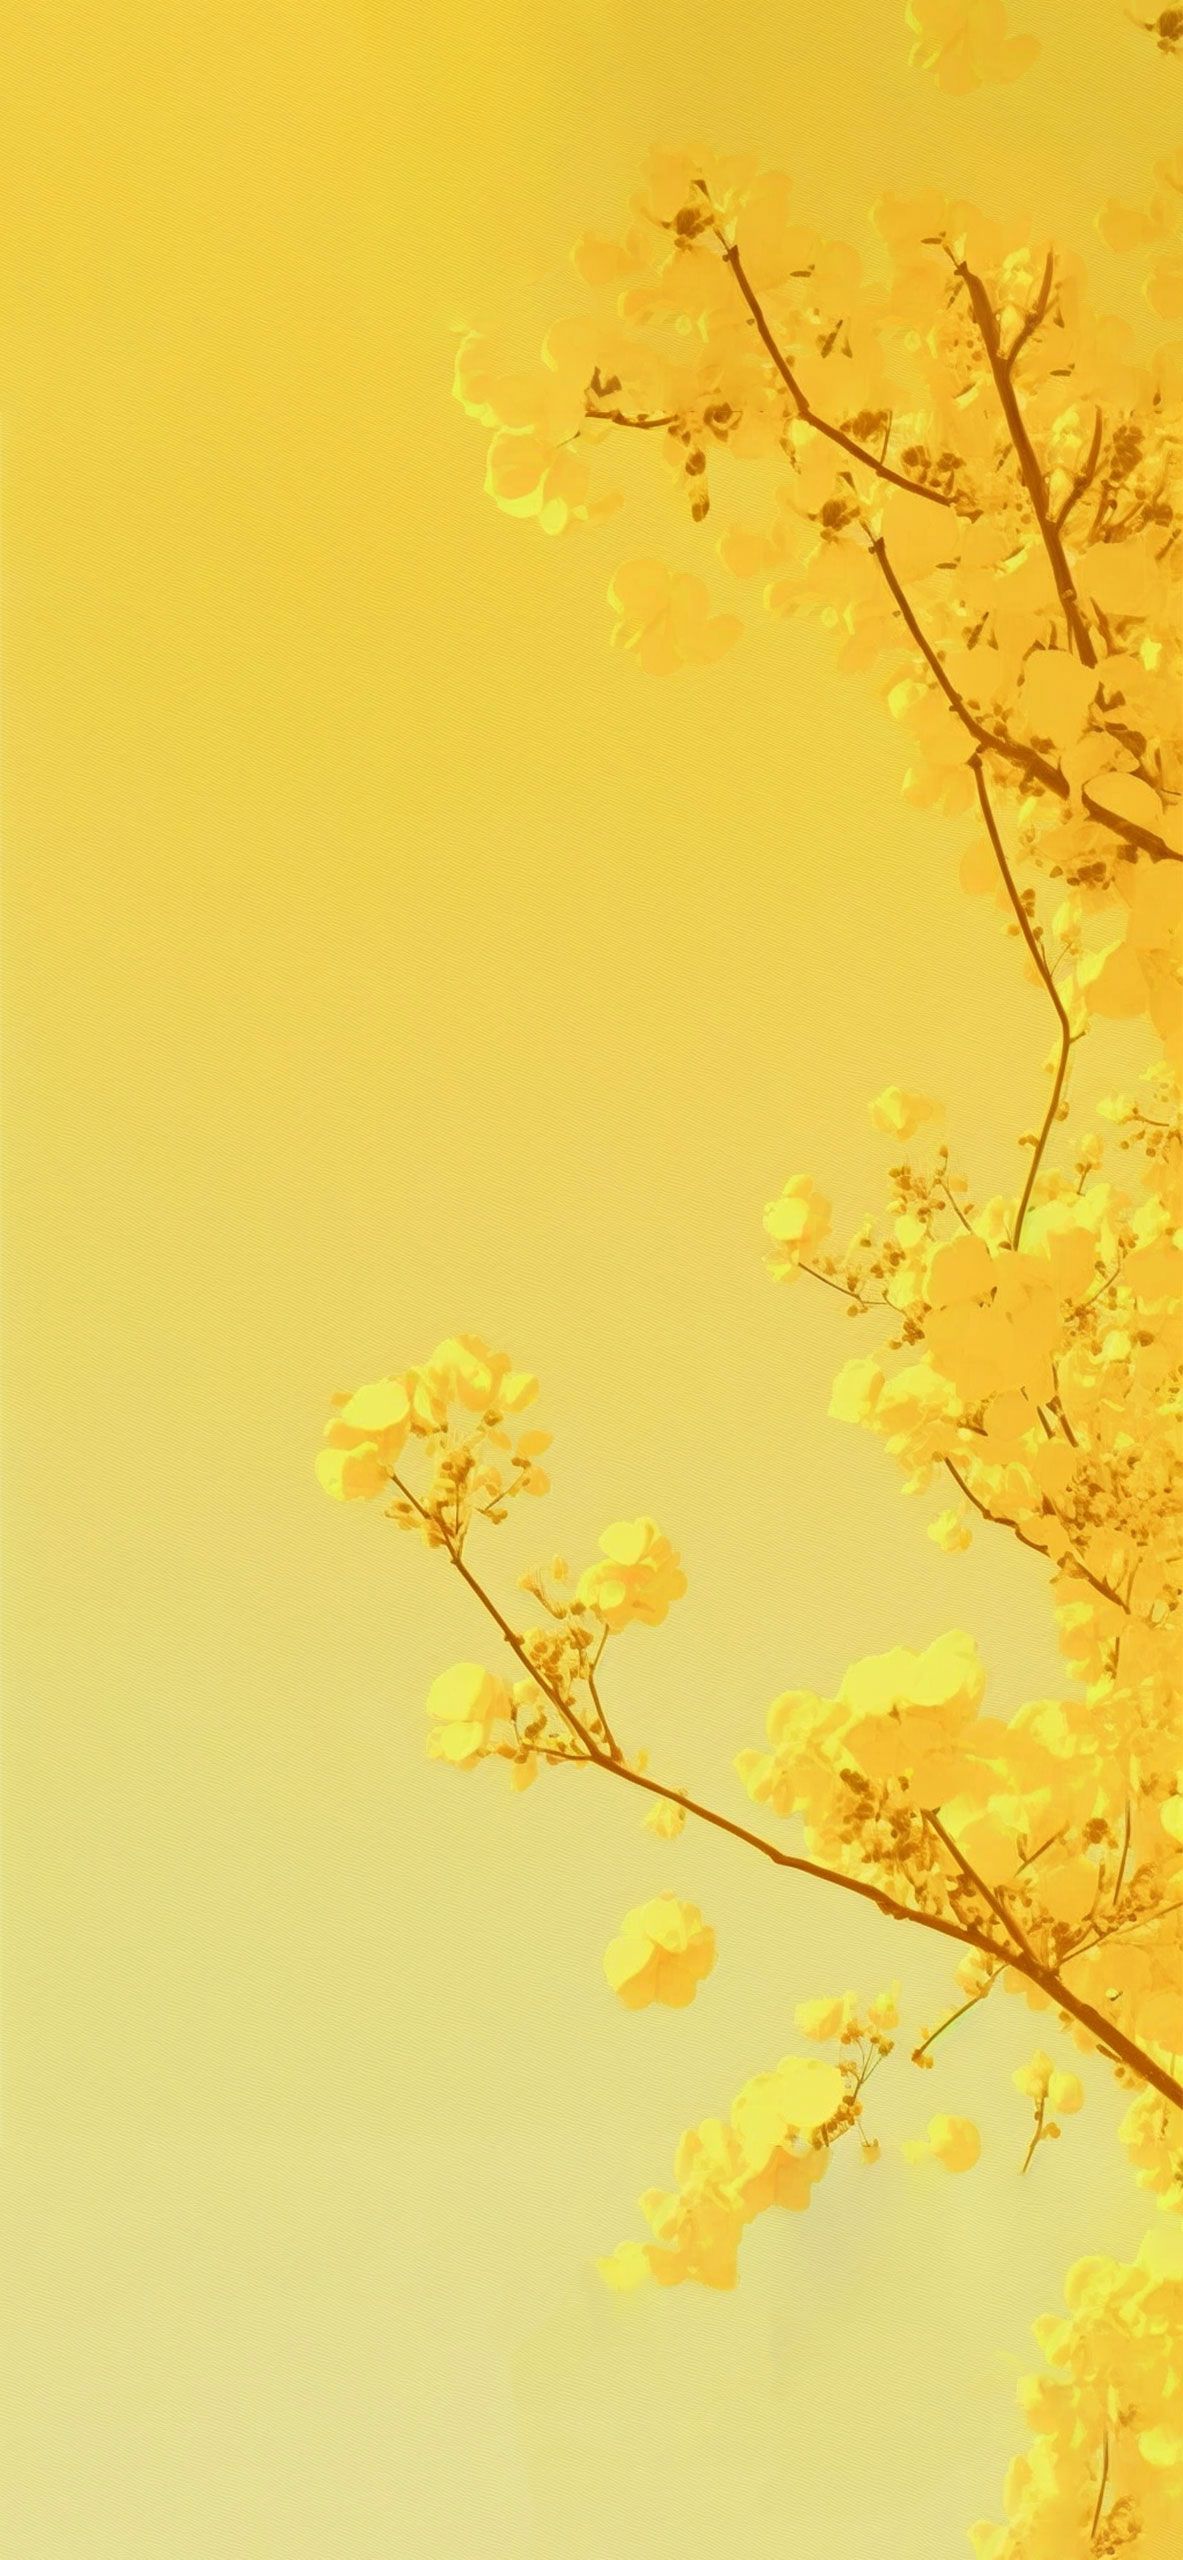 A yellow tree branch with yellow flowers on a yellow background - Yellow, yellow iphone